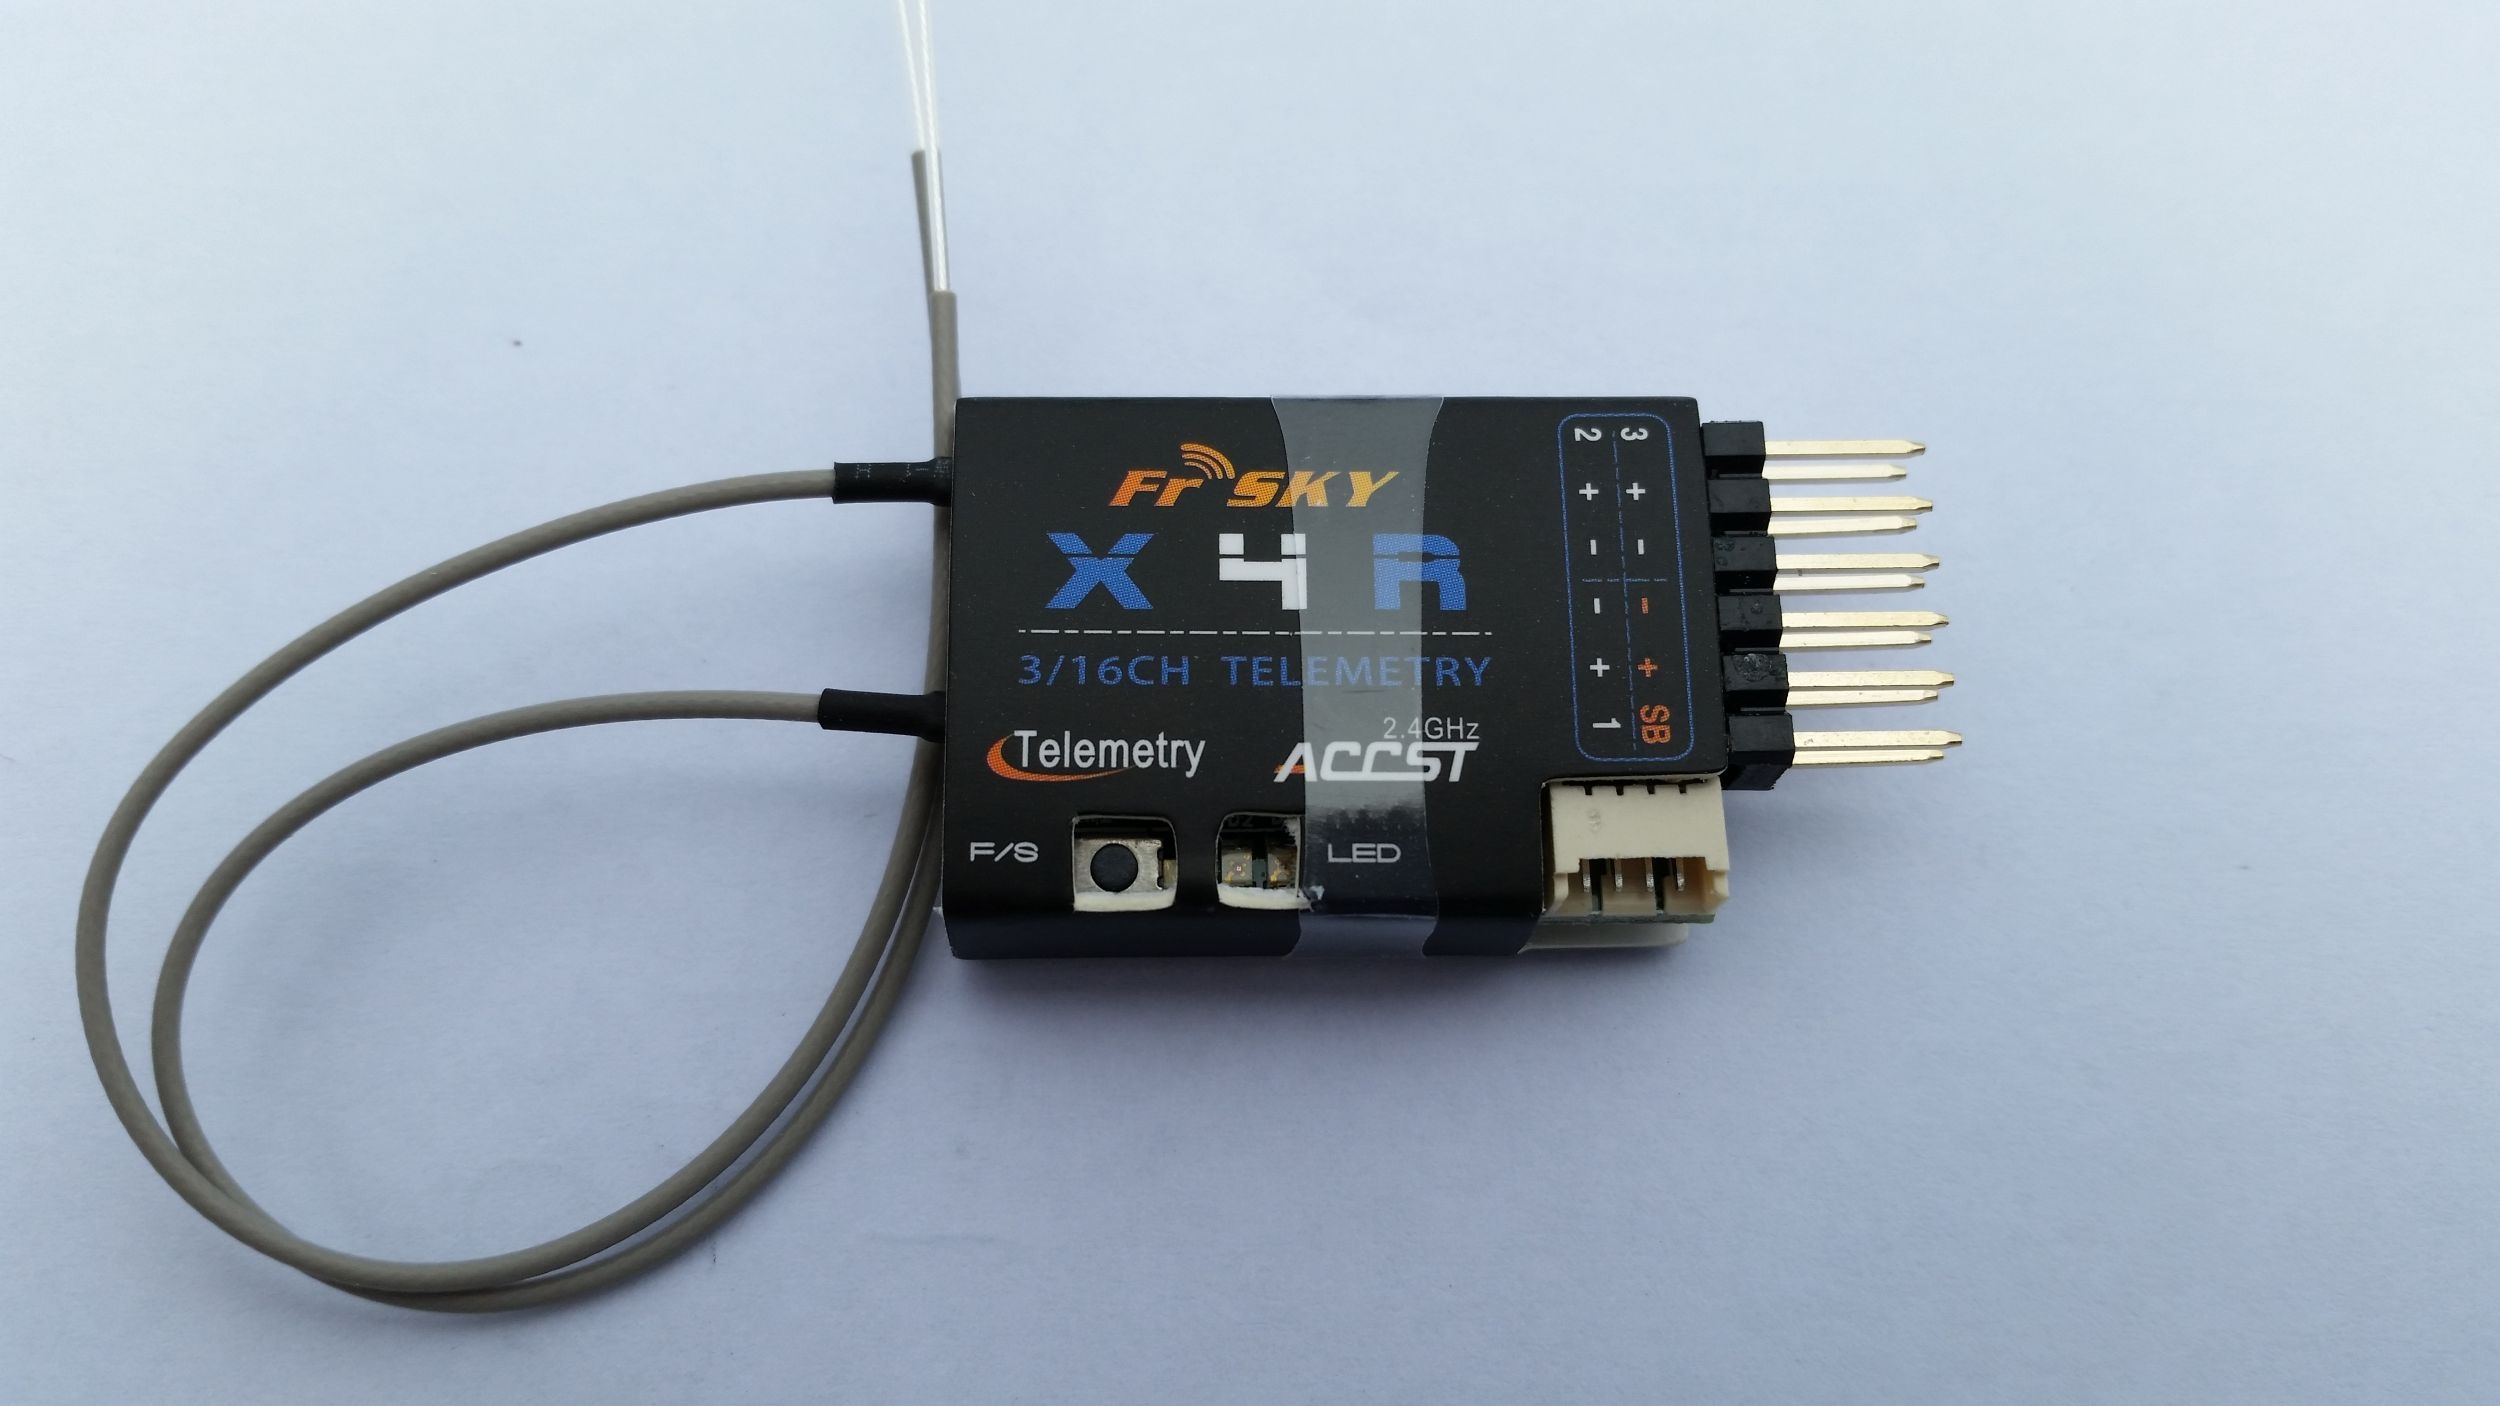 FrSky X4R-SB 2.4Ghz 3/16ch receiver with s-bus - FPVee